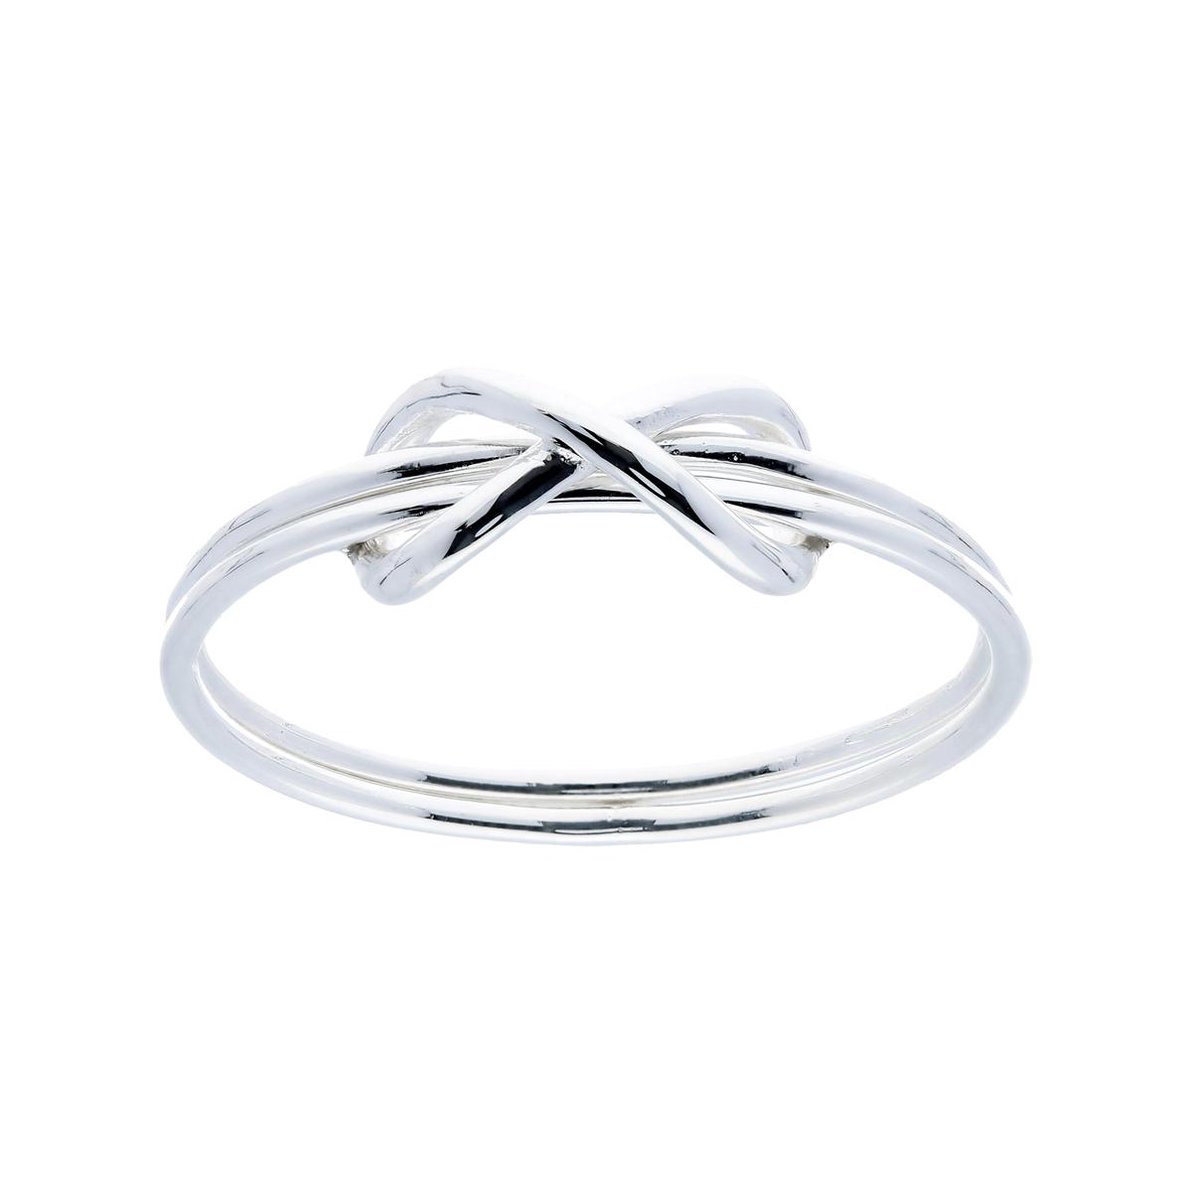 Lovenotes ring - zilver - infinity - dubbele band - maat 48